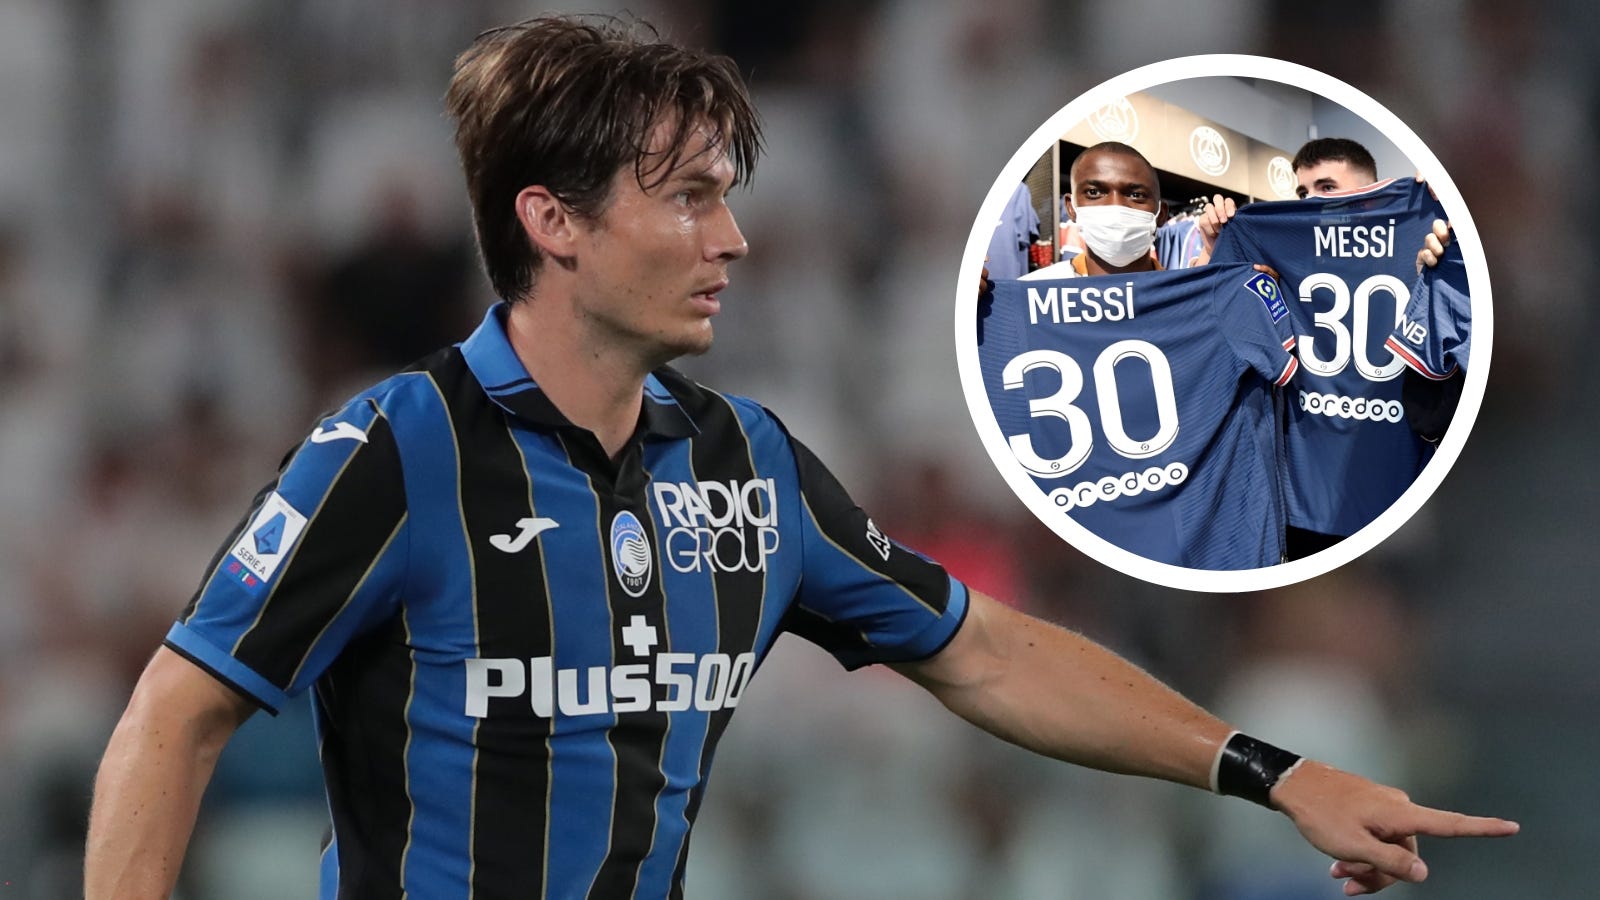 I bet Messi never has to deal with this!' - De Roon can't give shirts away in Atalanta shop - Goal.com US